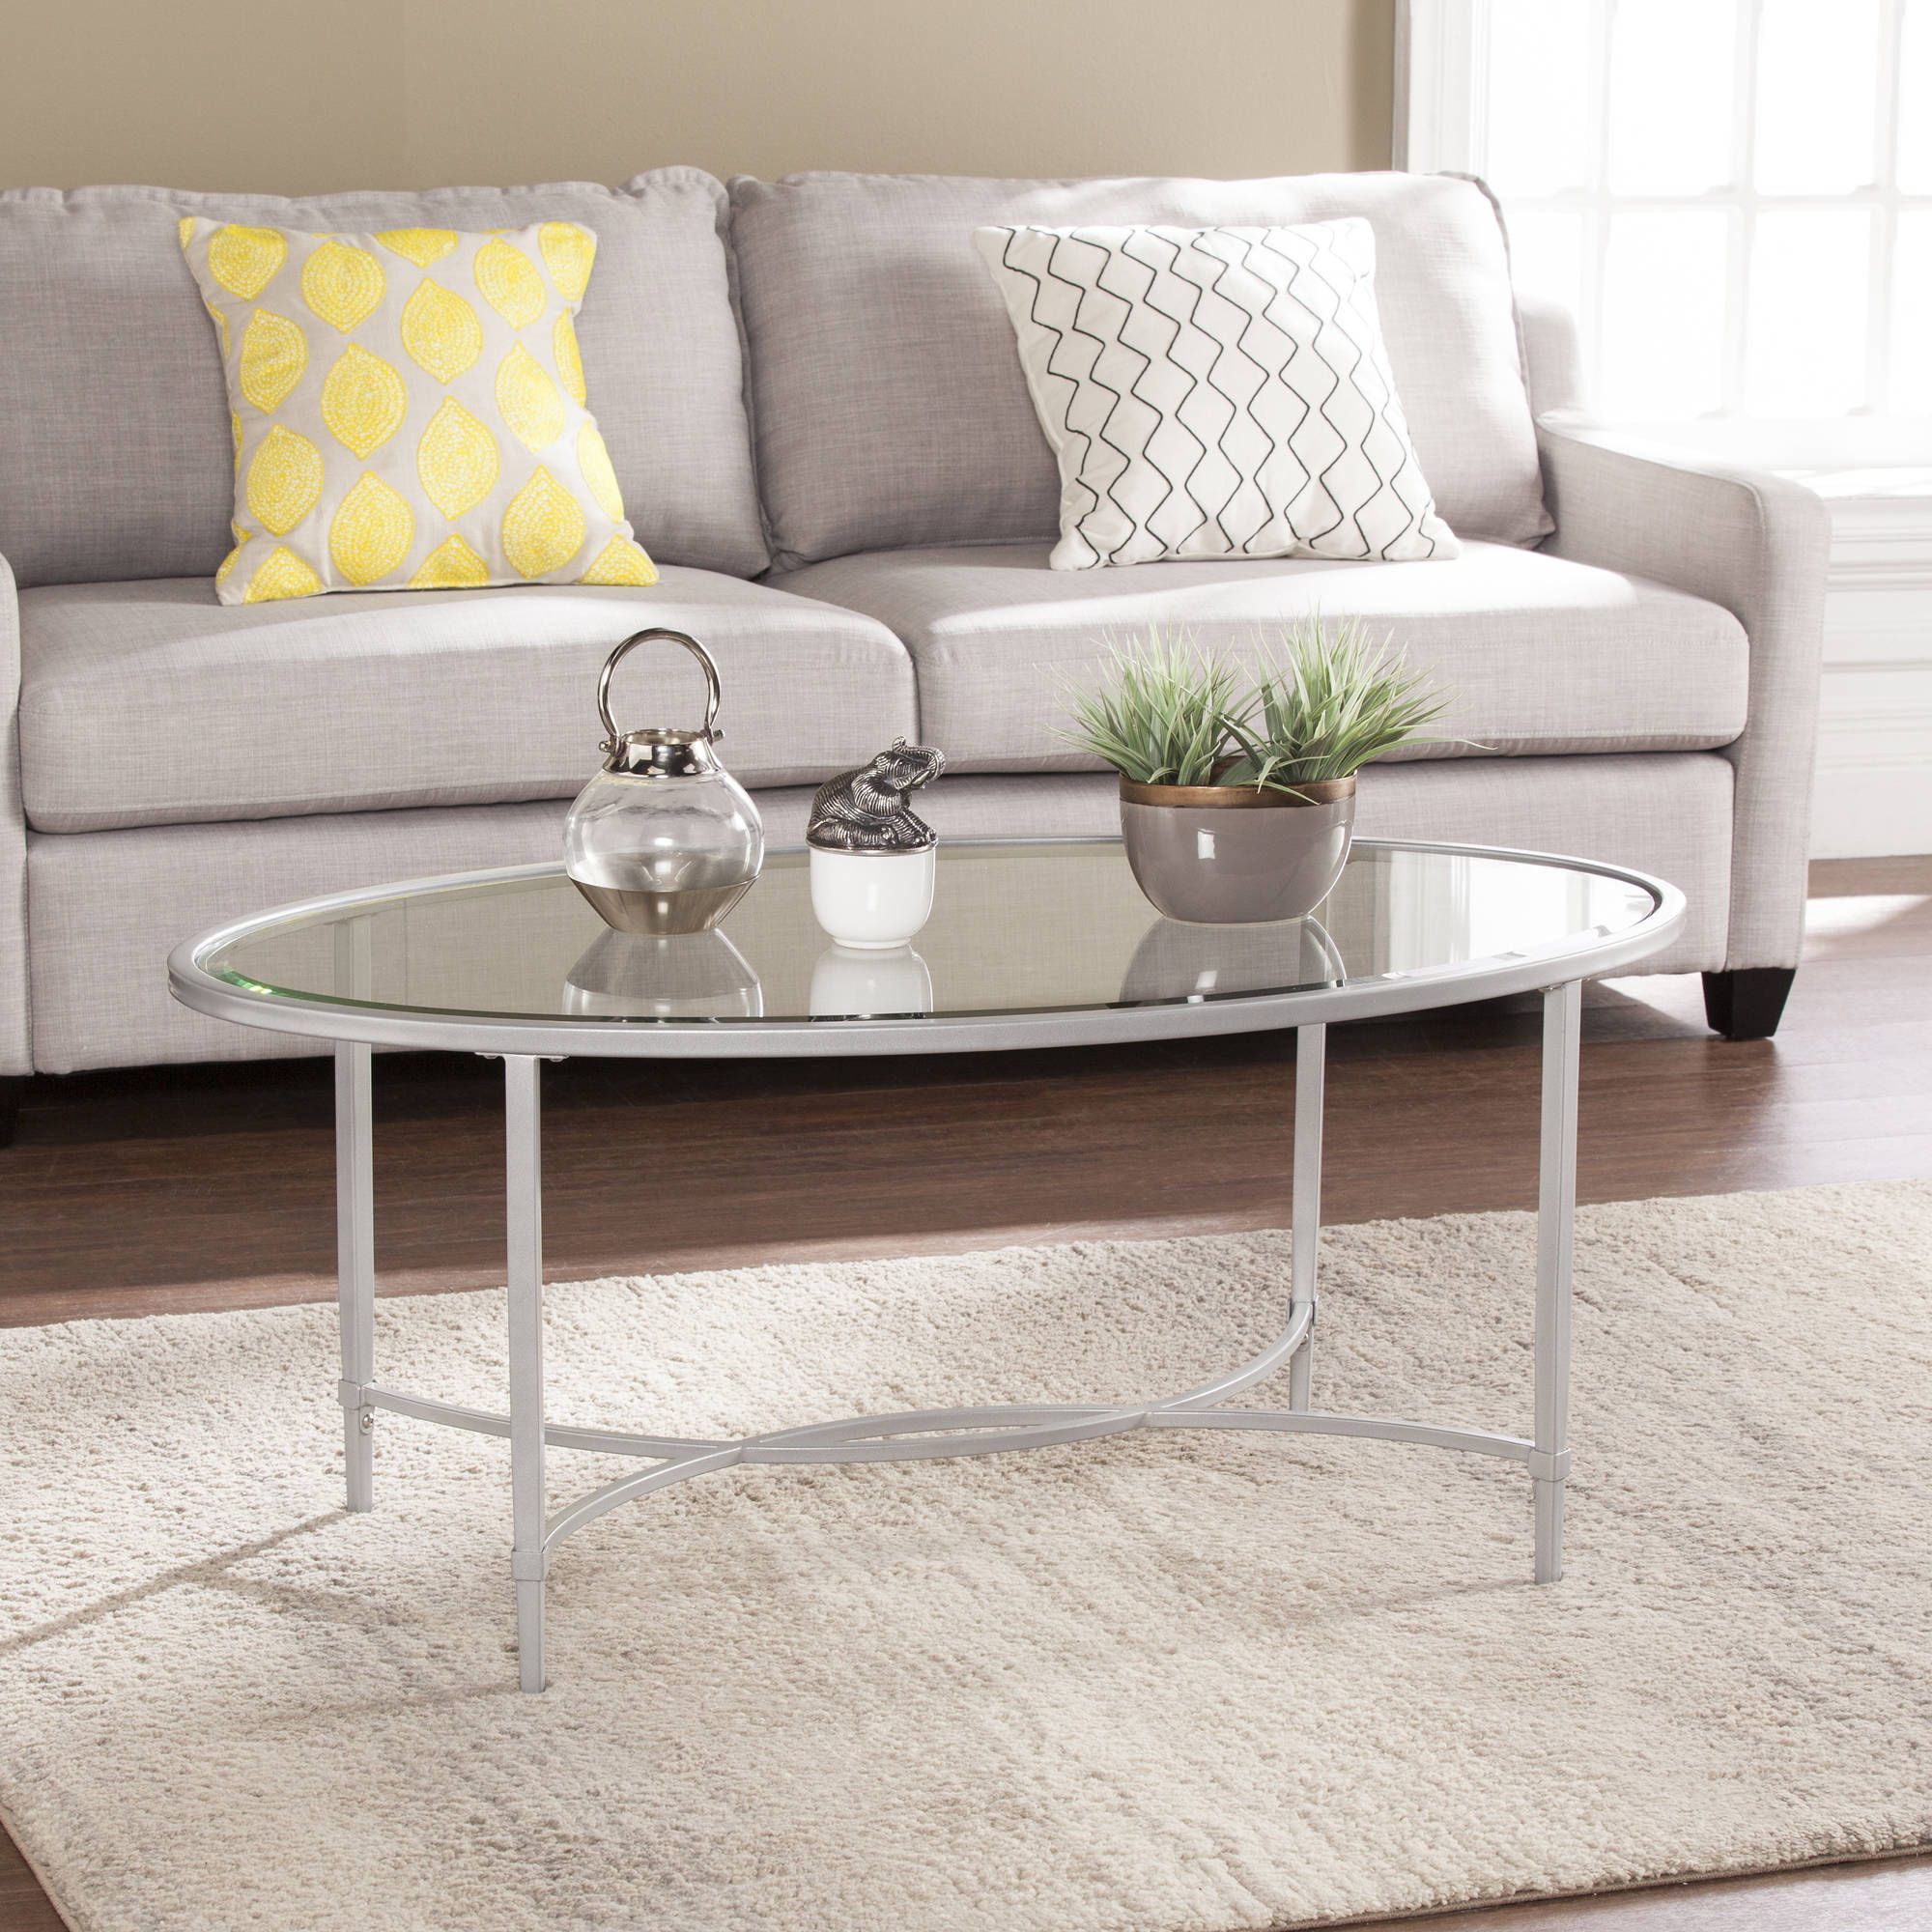 Metallic Silver Cocktail Tables Within Well Liked Quibilah Metal/glass Oval Coffee Table, Silver – Walmart – Walmart (View 3 of 10)